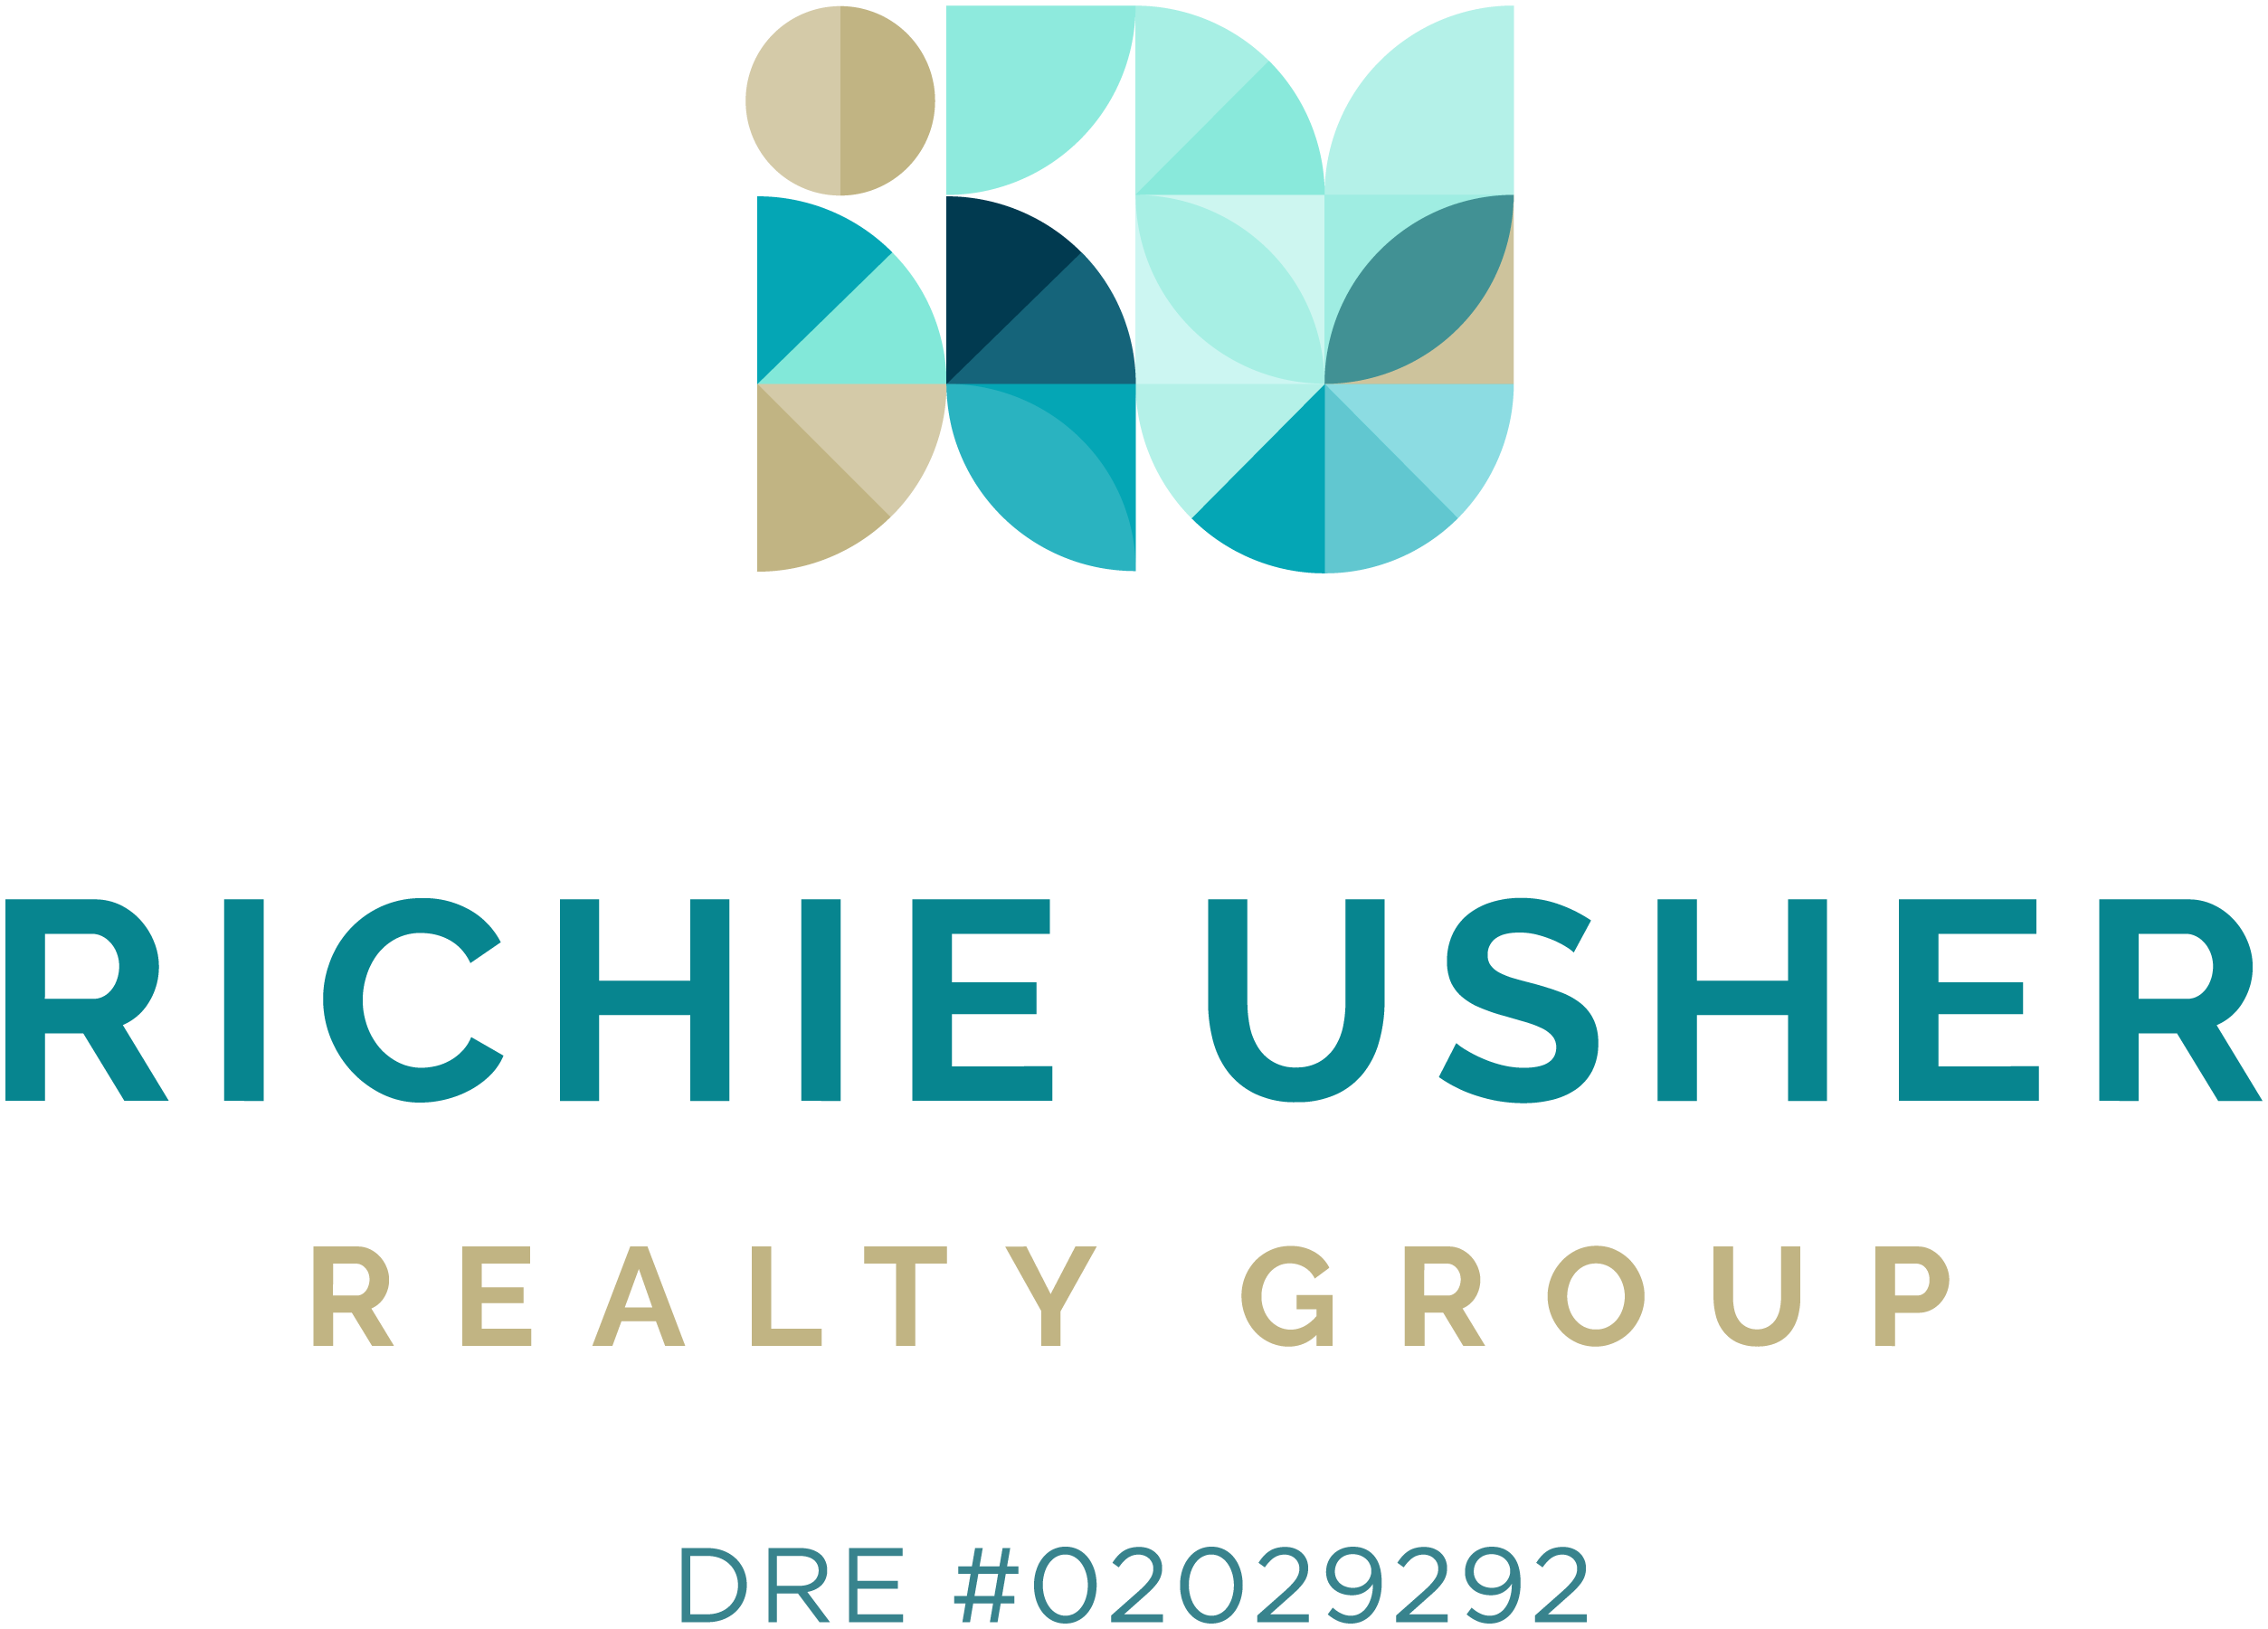 Richie Usher Realty Group